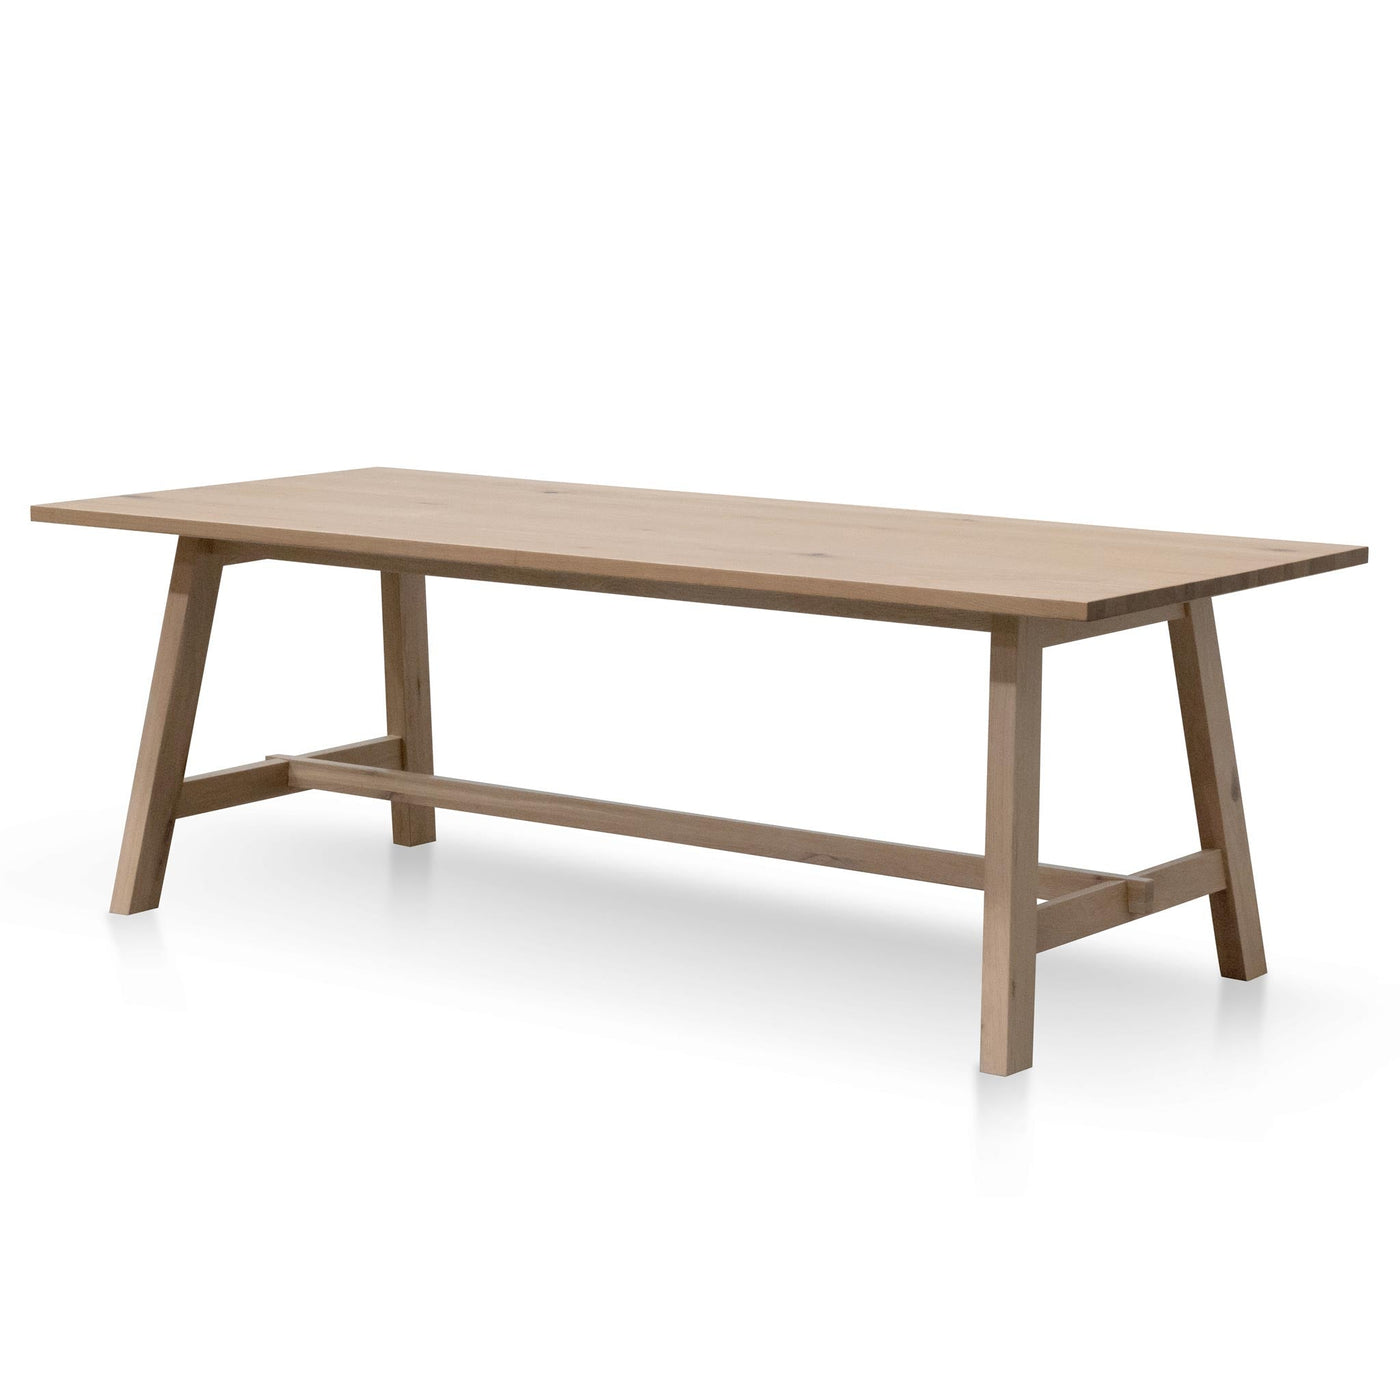 2.2m Wooden Dining Table - Washed Natural